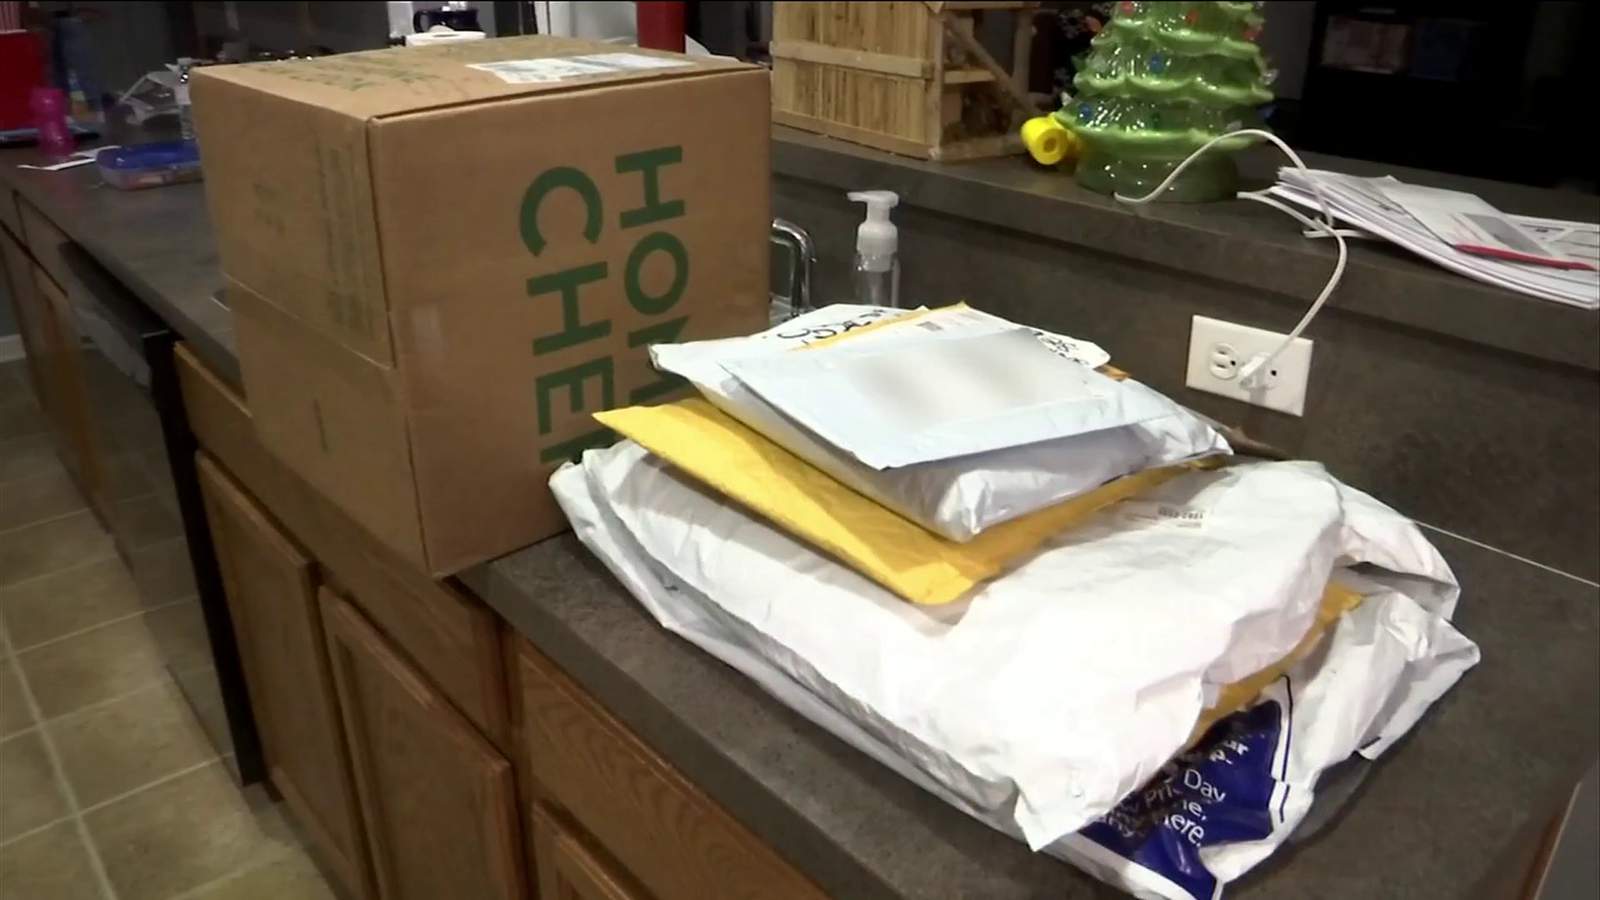 Jacksonville woman says 11 delivered FedEx packages weren’t hers